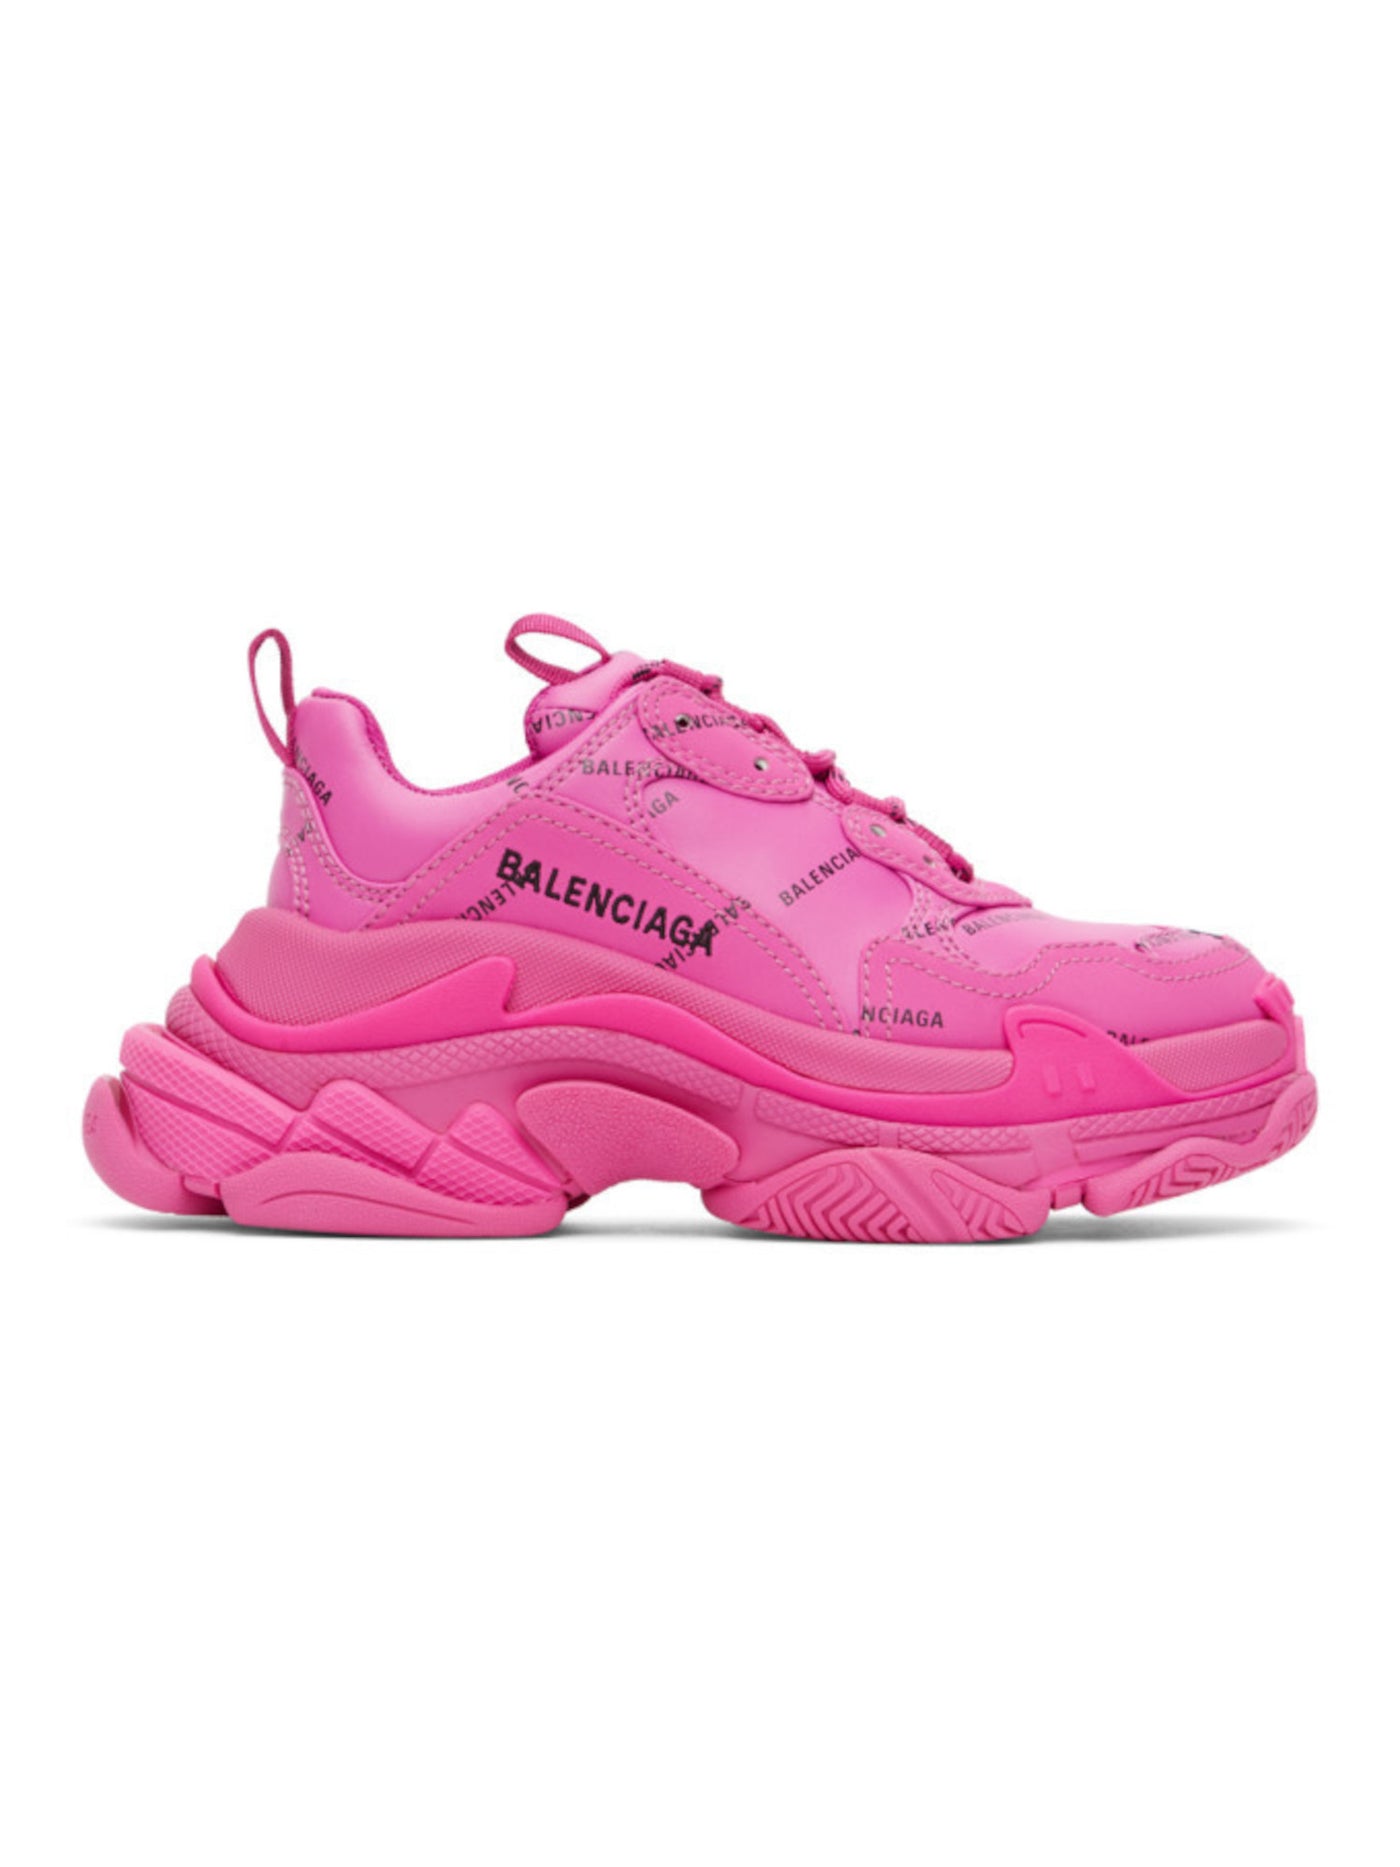 BALENCIAGA Womens Pink 1-1/2" Platform Removable Insole Logo Triple S Round Toe Lace-Up Athletic Sneakers Shoes 5